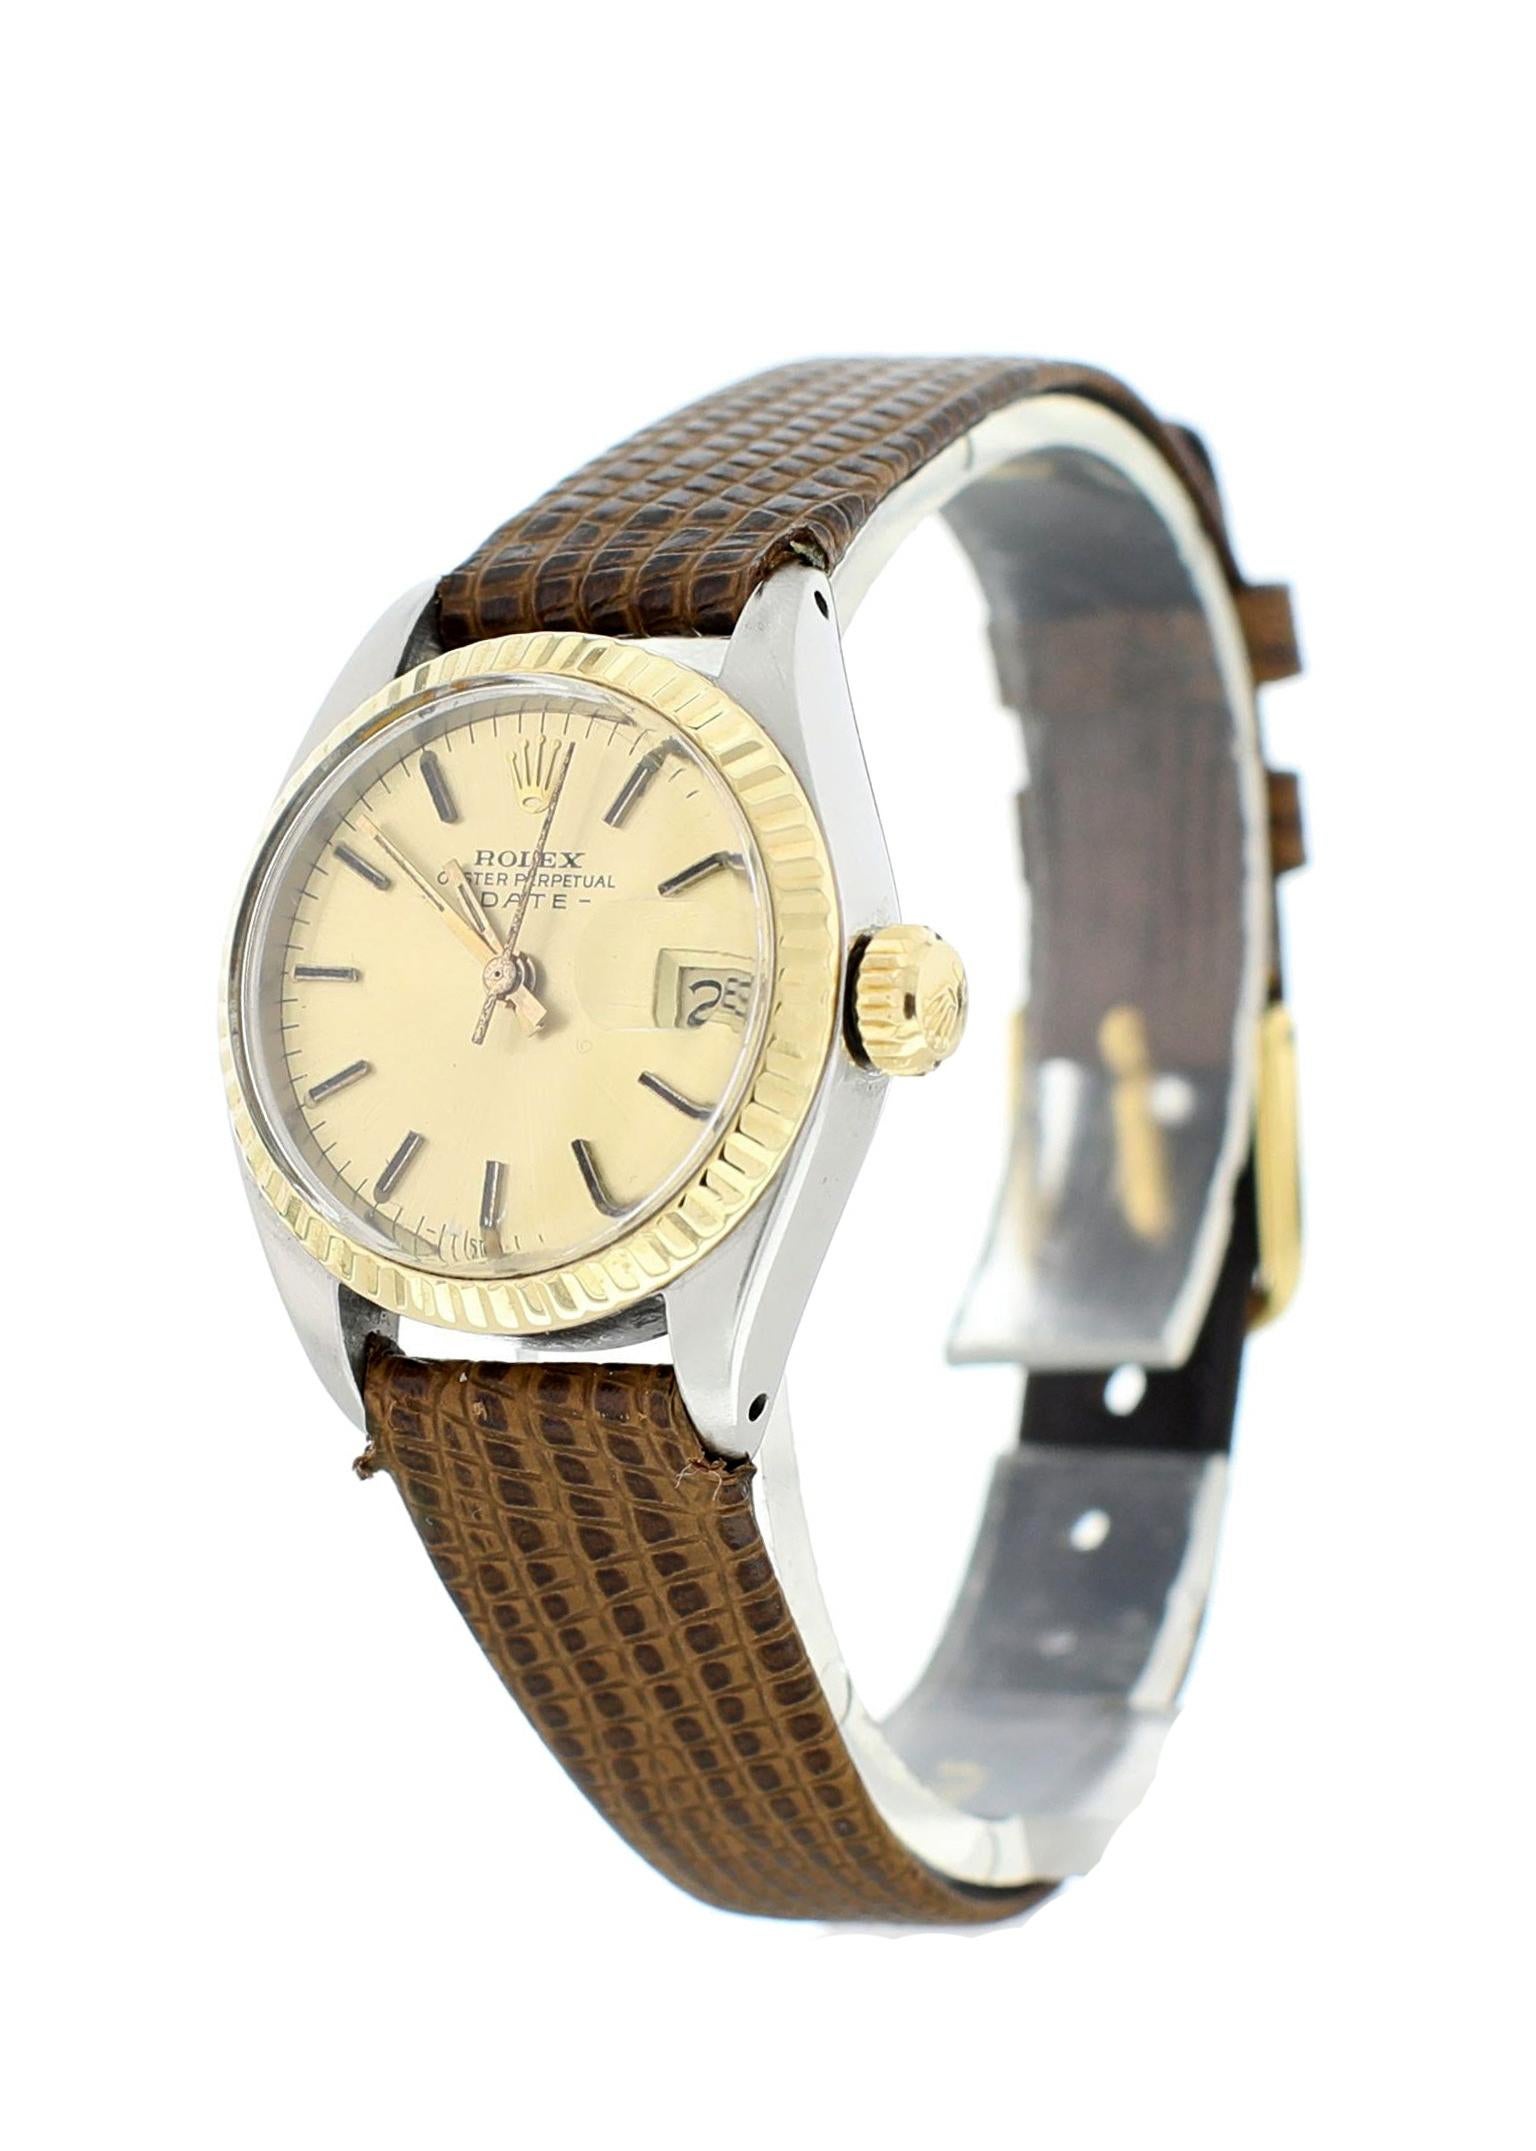 Rolex Oyster Perpetual Date 6917 Ladies Watch. 26 mm stainless steel case. 18k yellow gold fluted bezel. Champagne dial with yellow gold hands and markers. Brown Lizard Grain Strap with Gold Plated Buckle that will fit up to a 6-inch wrist.